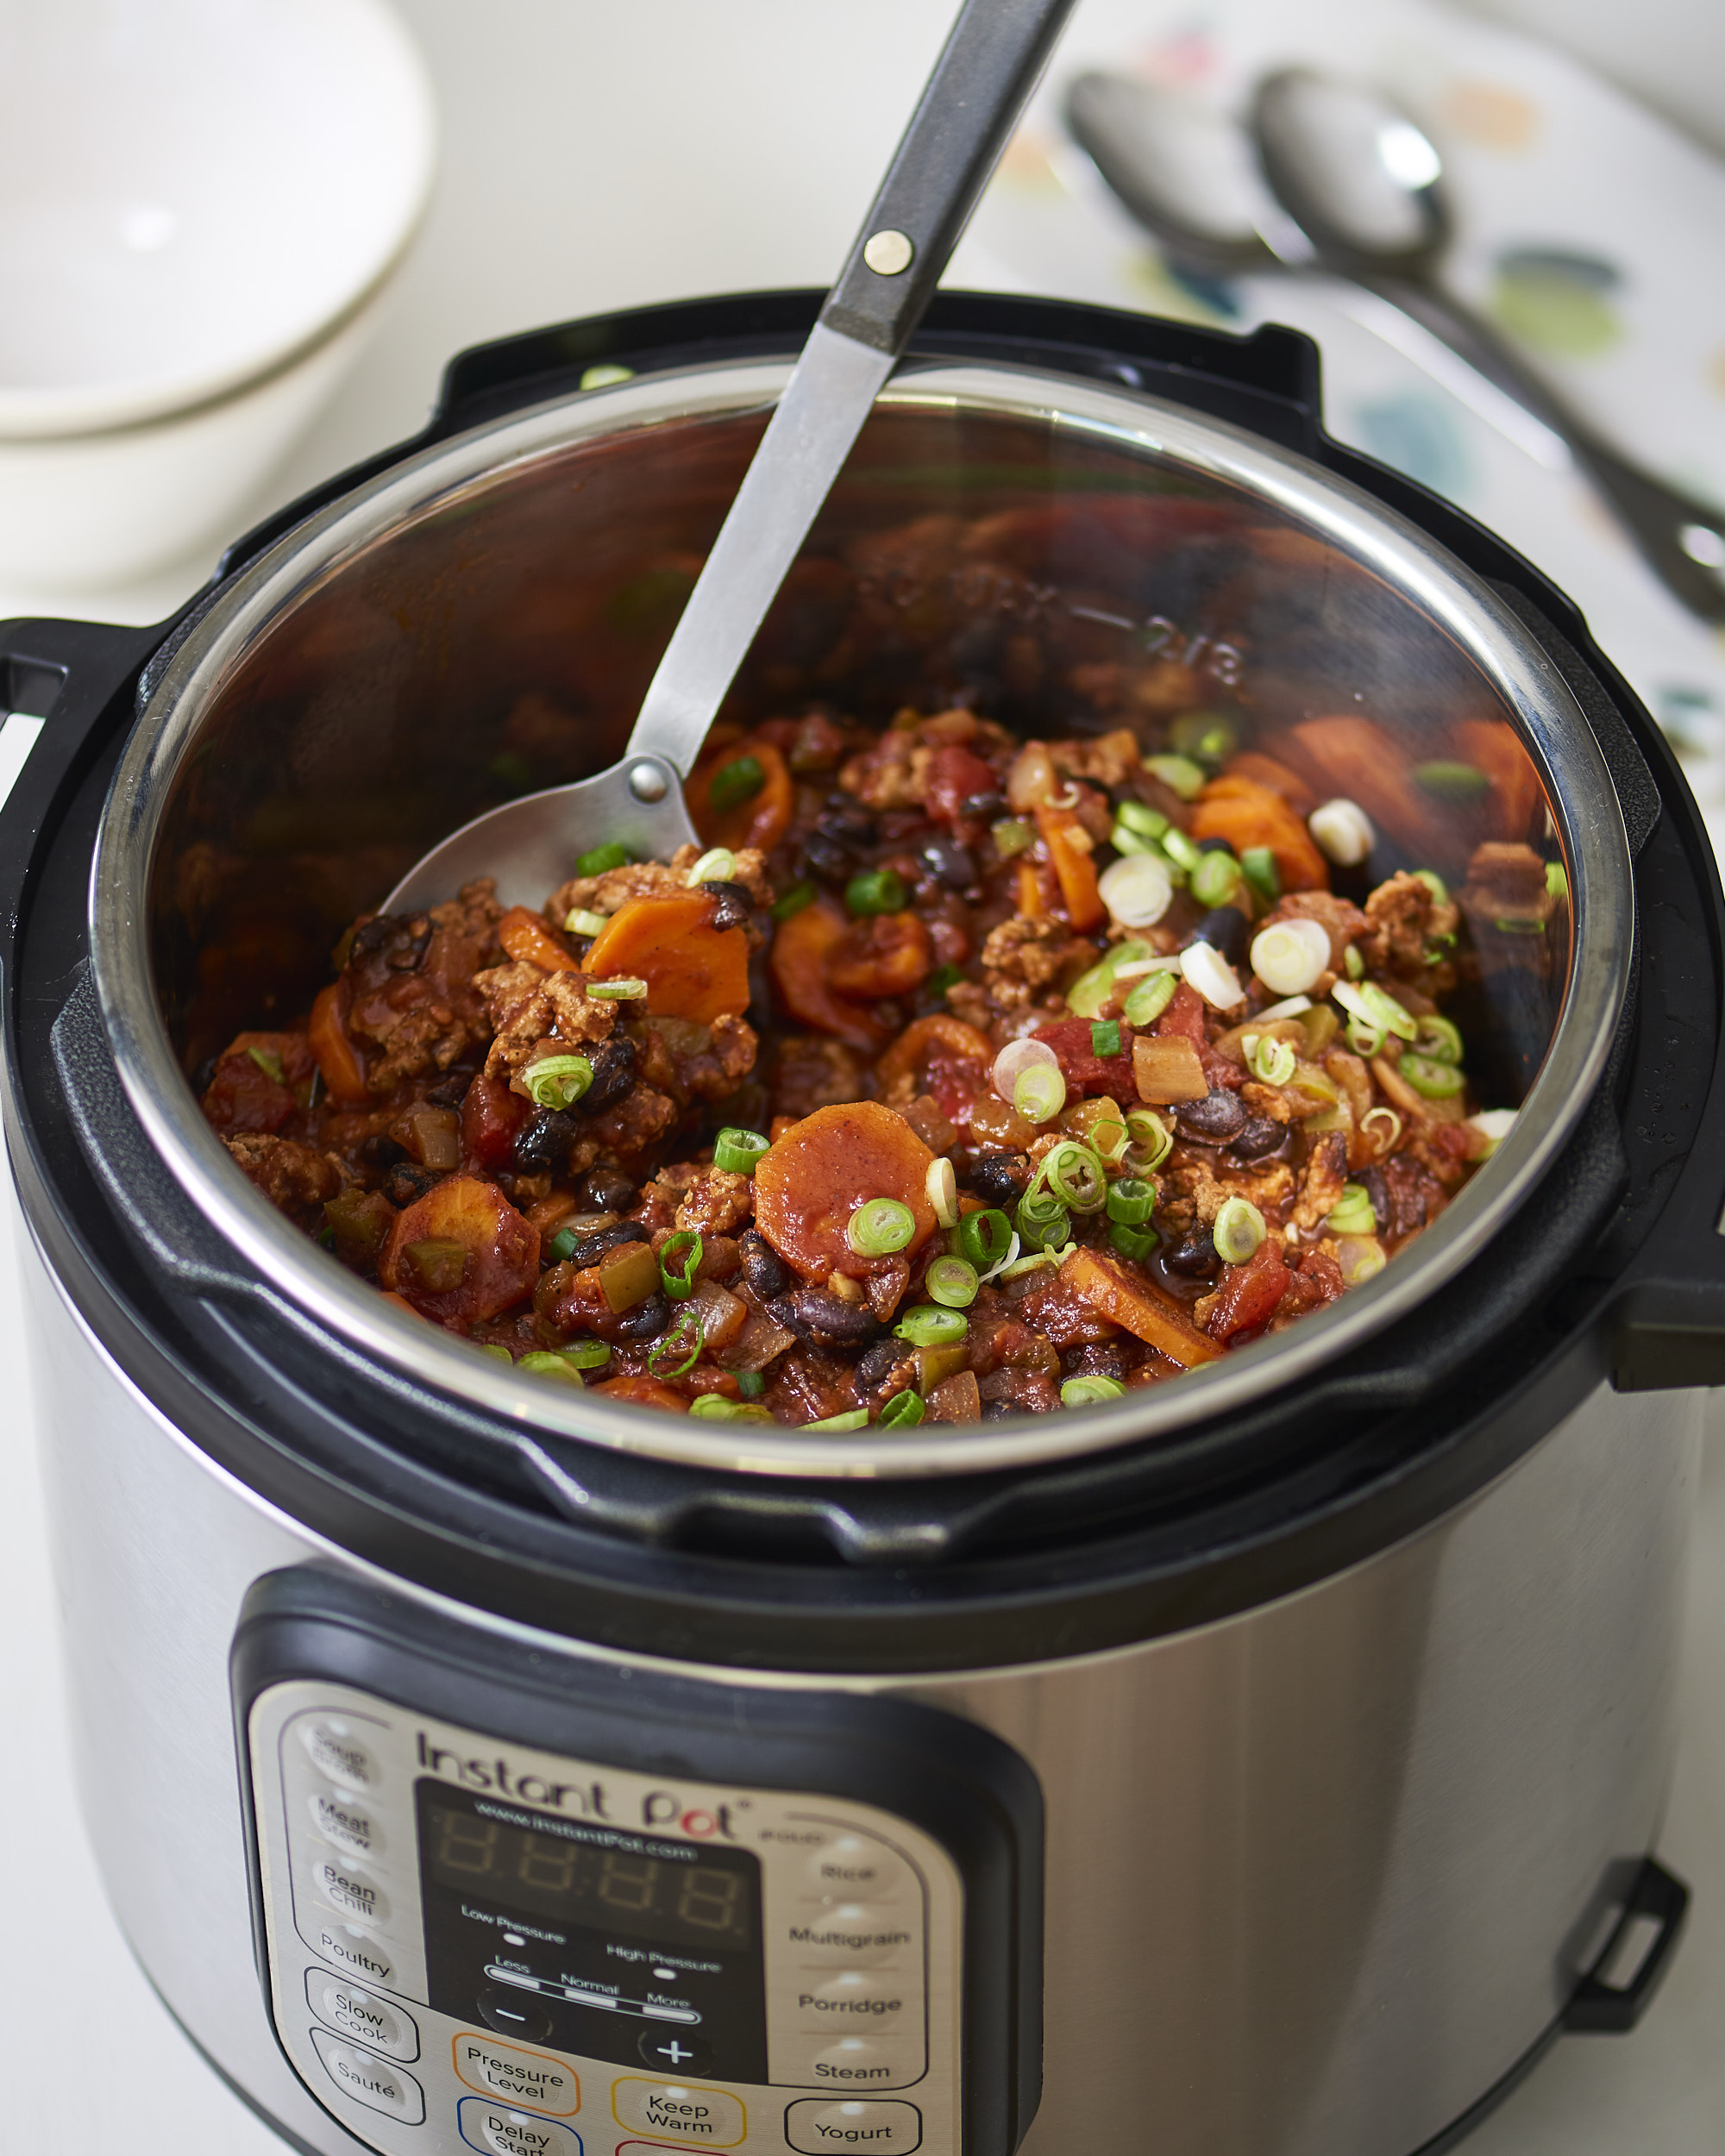 Yum! Instant Pot Cooking class shares recipes & tips for pressure cooking –  Spokane County Library District